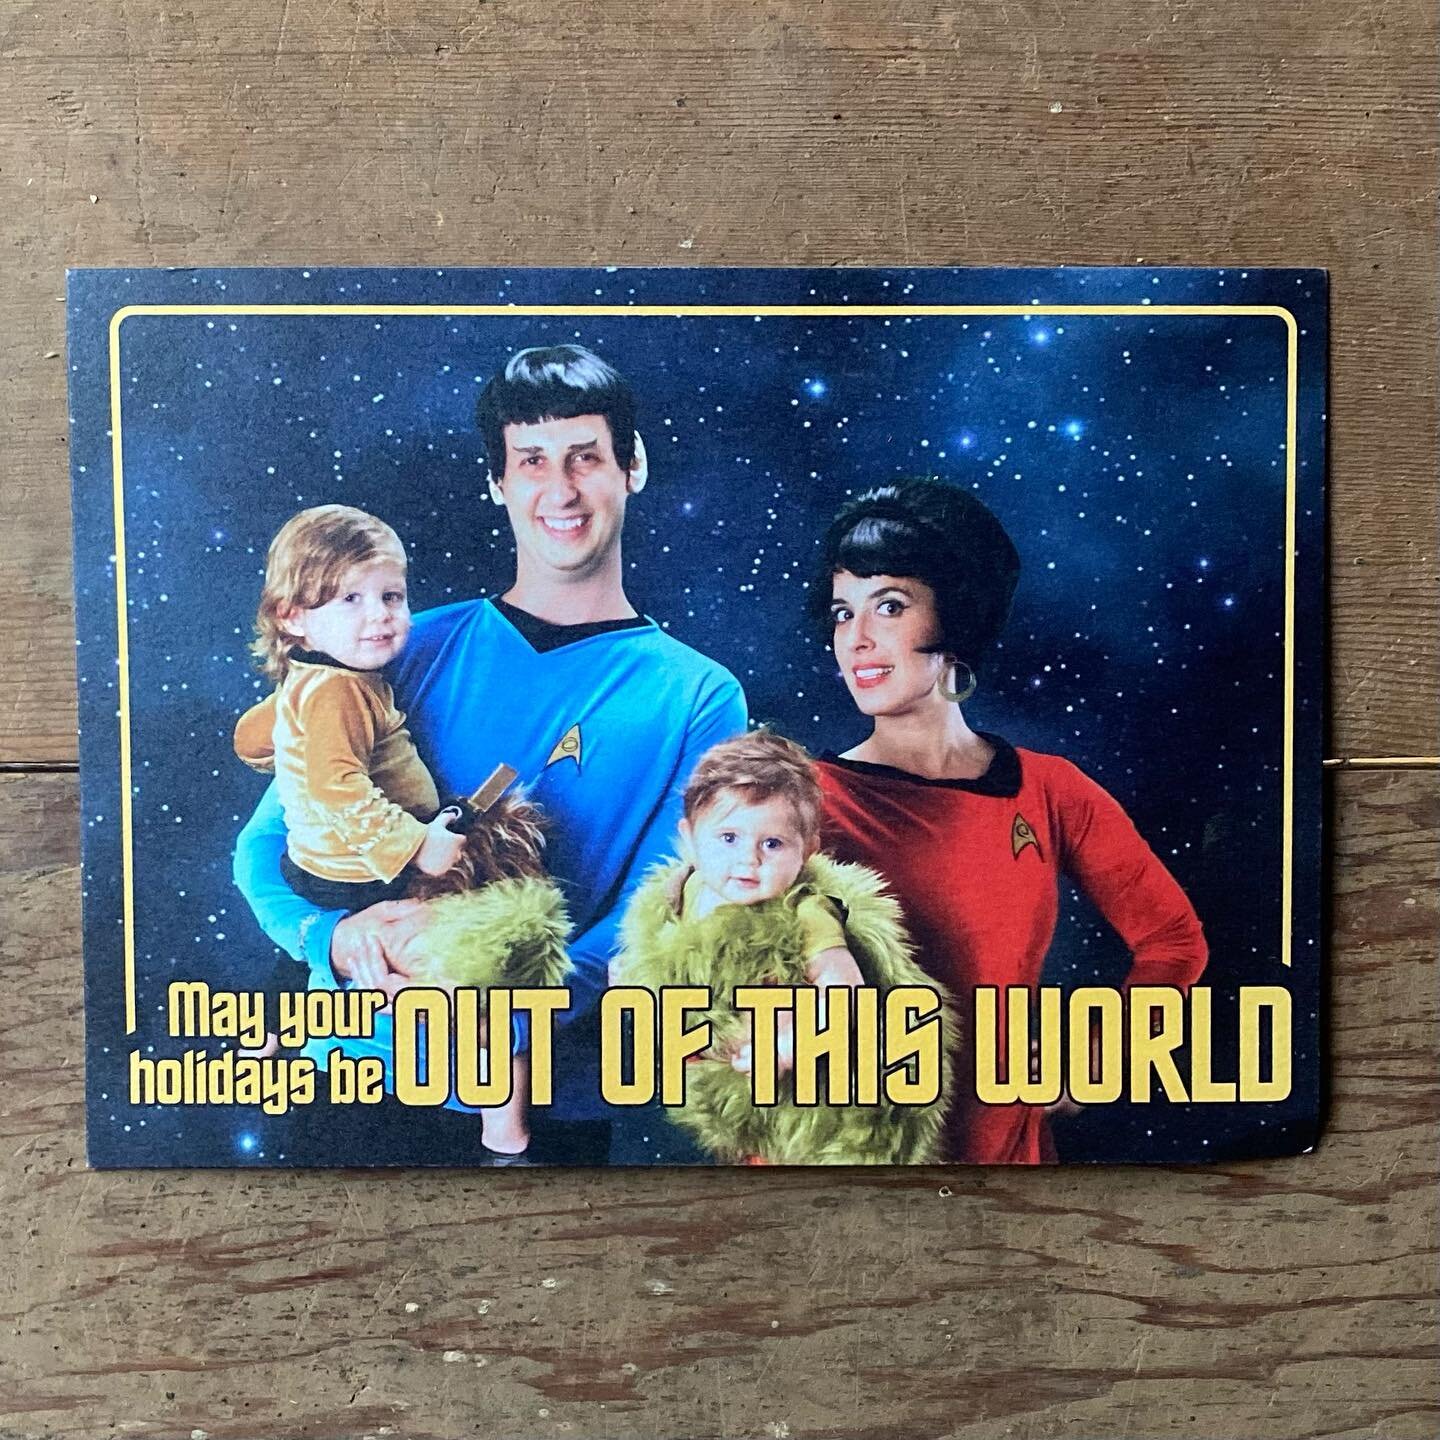 It&rsquo;s been a few years since I prioritized sending out holiday cards, but coming across this gem (which I had completely forgotten about!!) was pretty delightful. #nerds #startrek